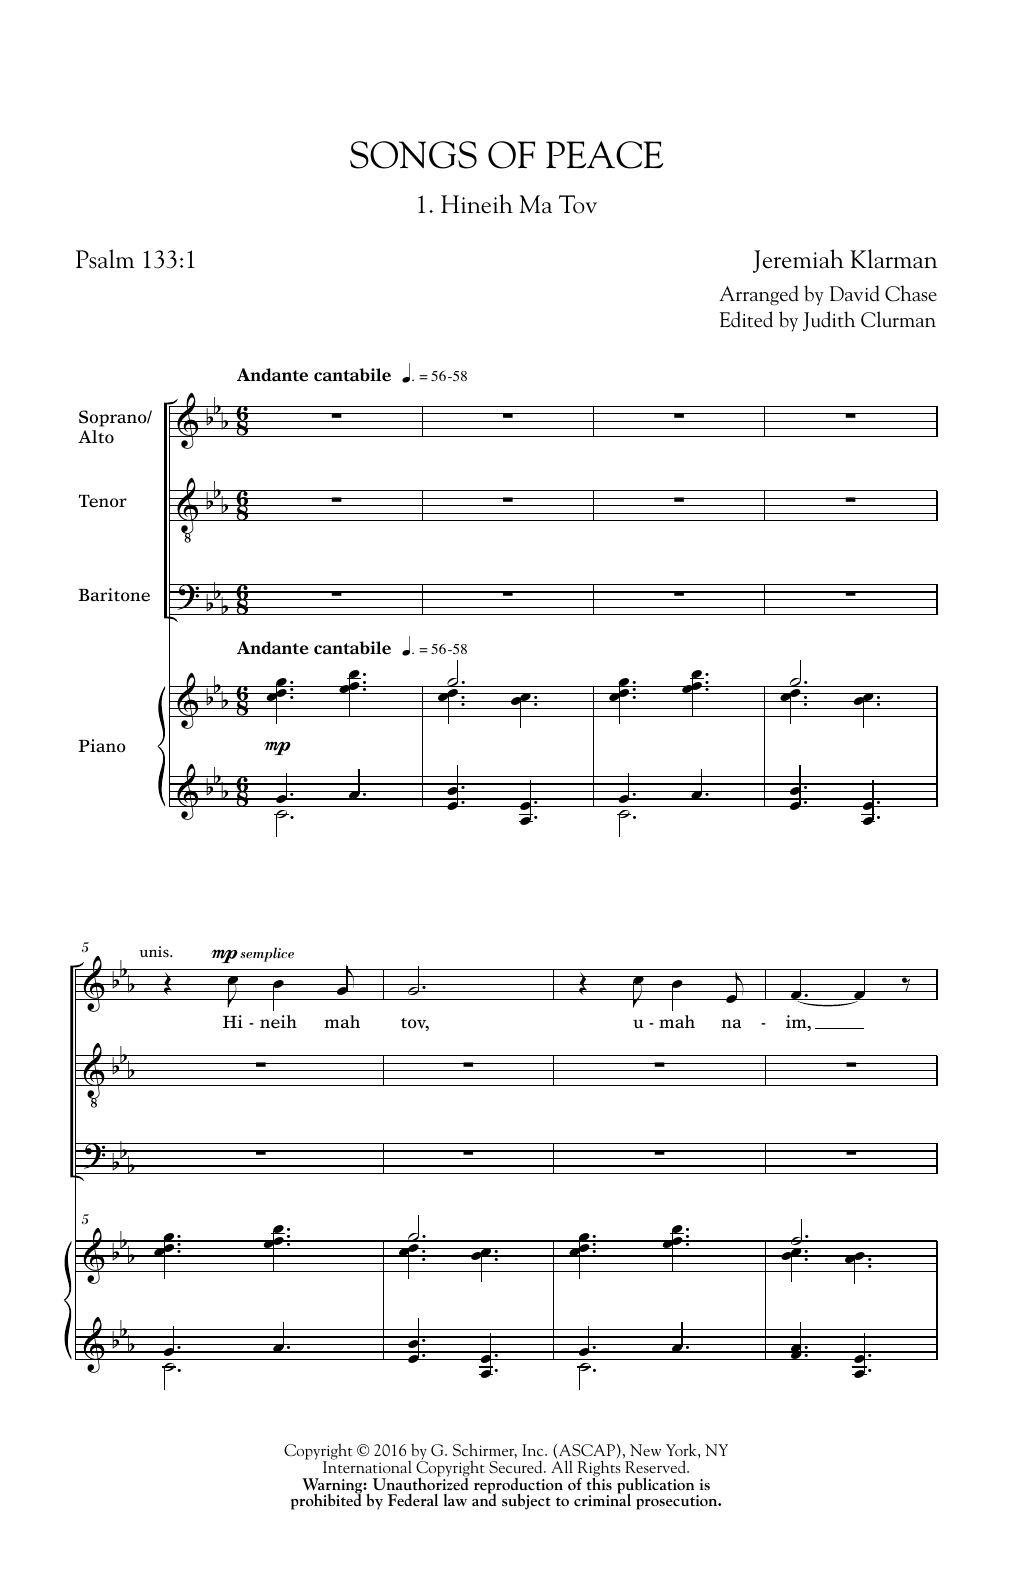 Download David Chase Songs Of Peace Sheet Music